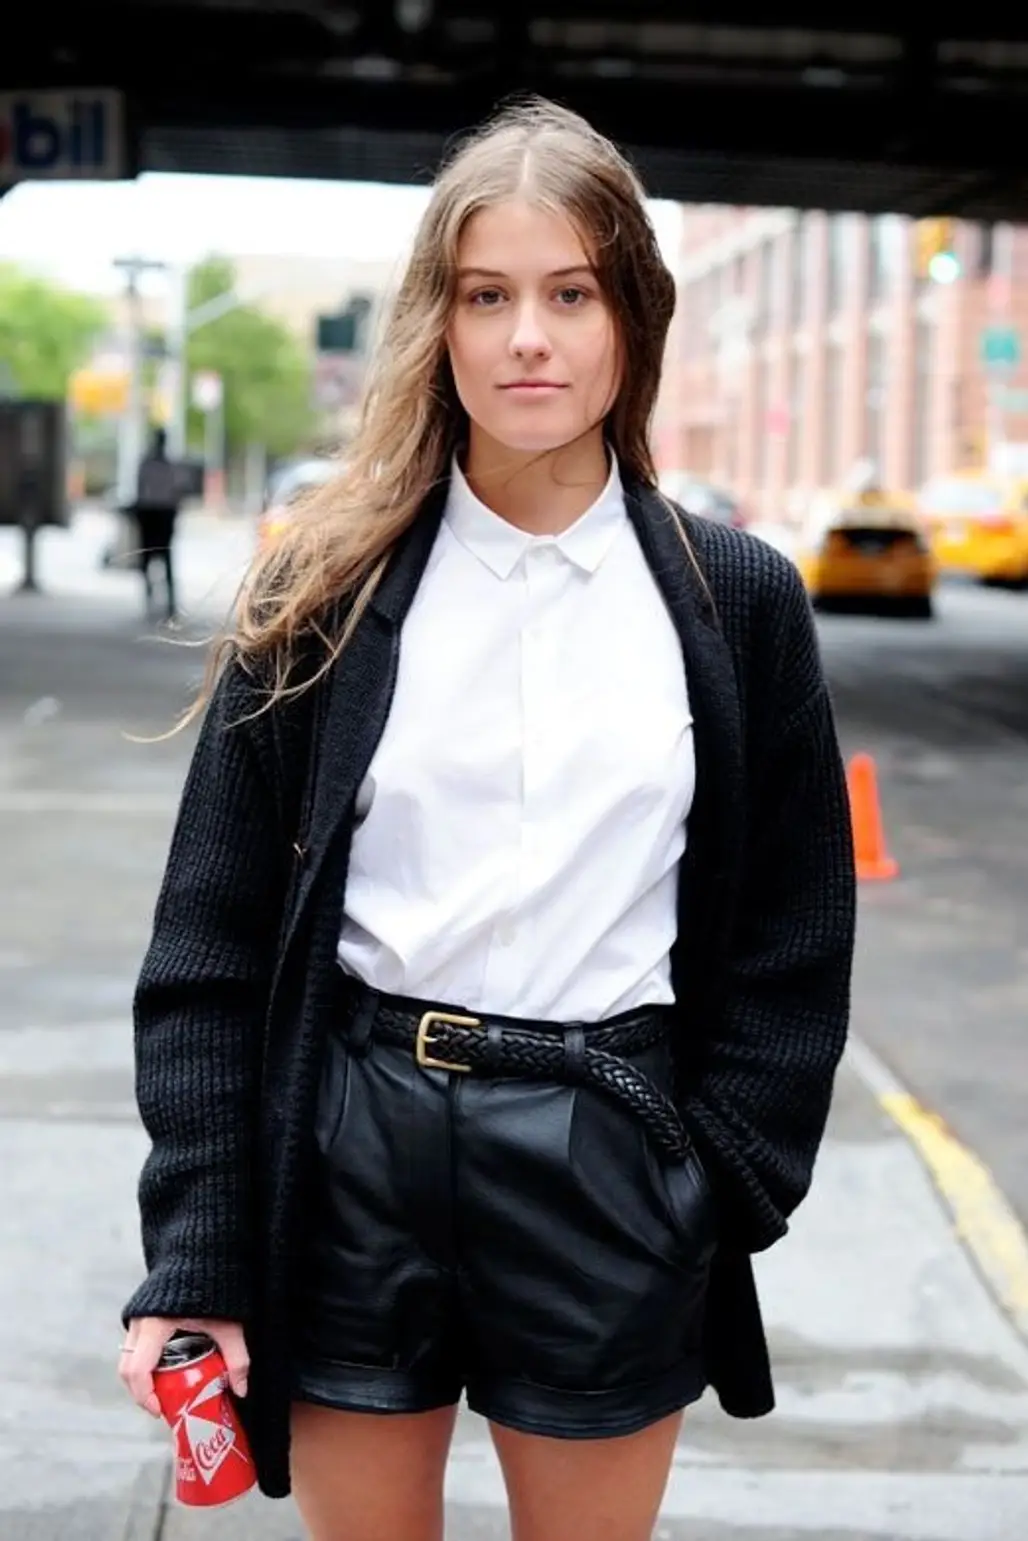 The Collard Shirt Fashion Guide You Need in Your Life